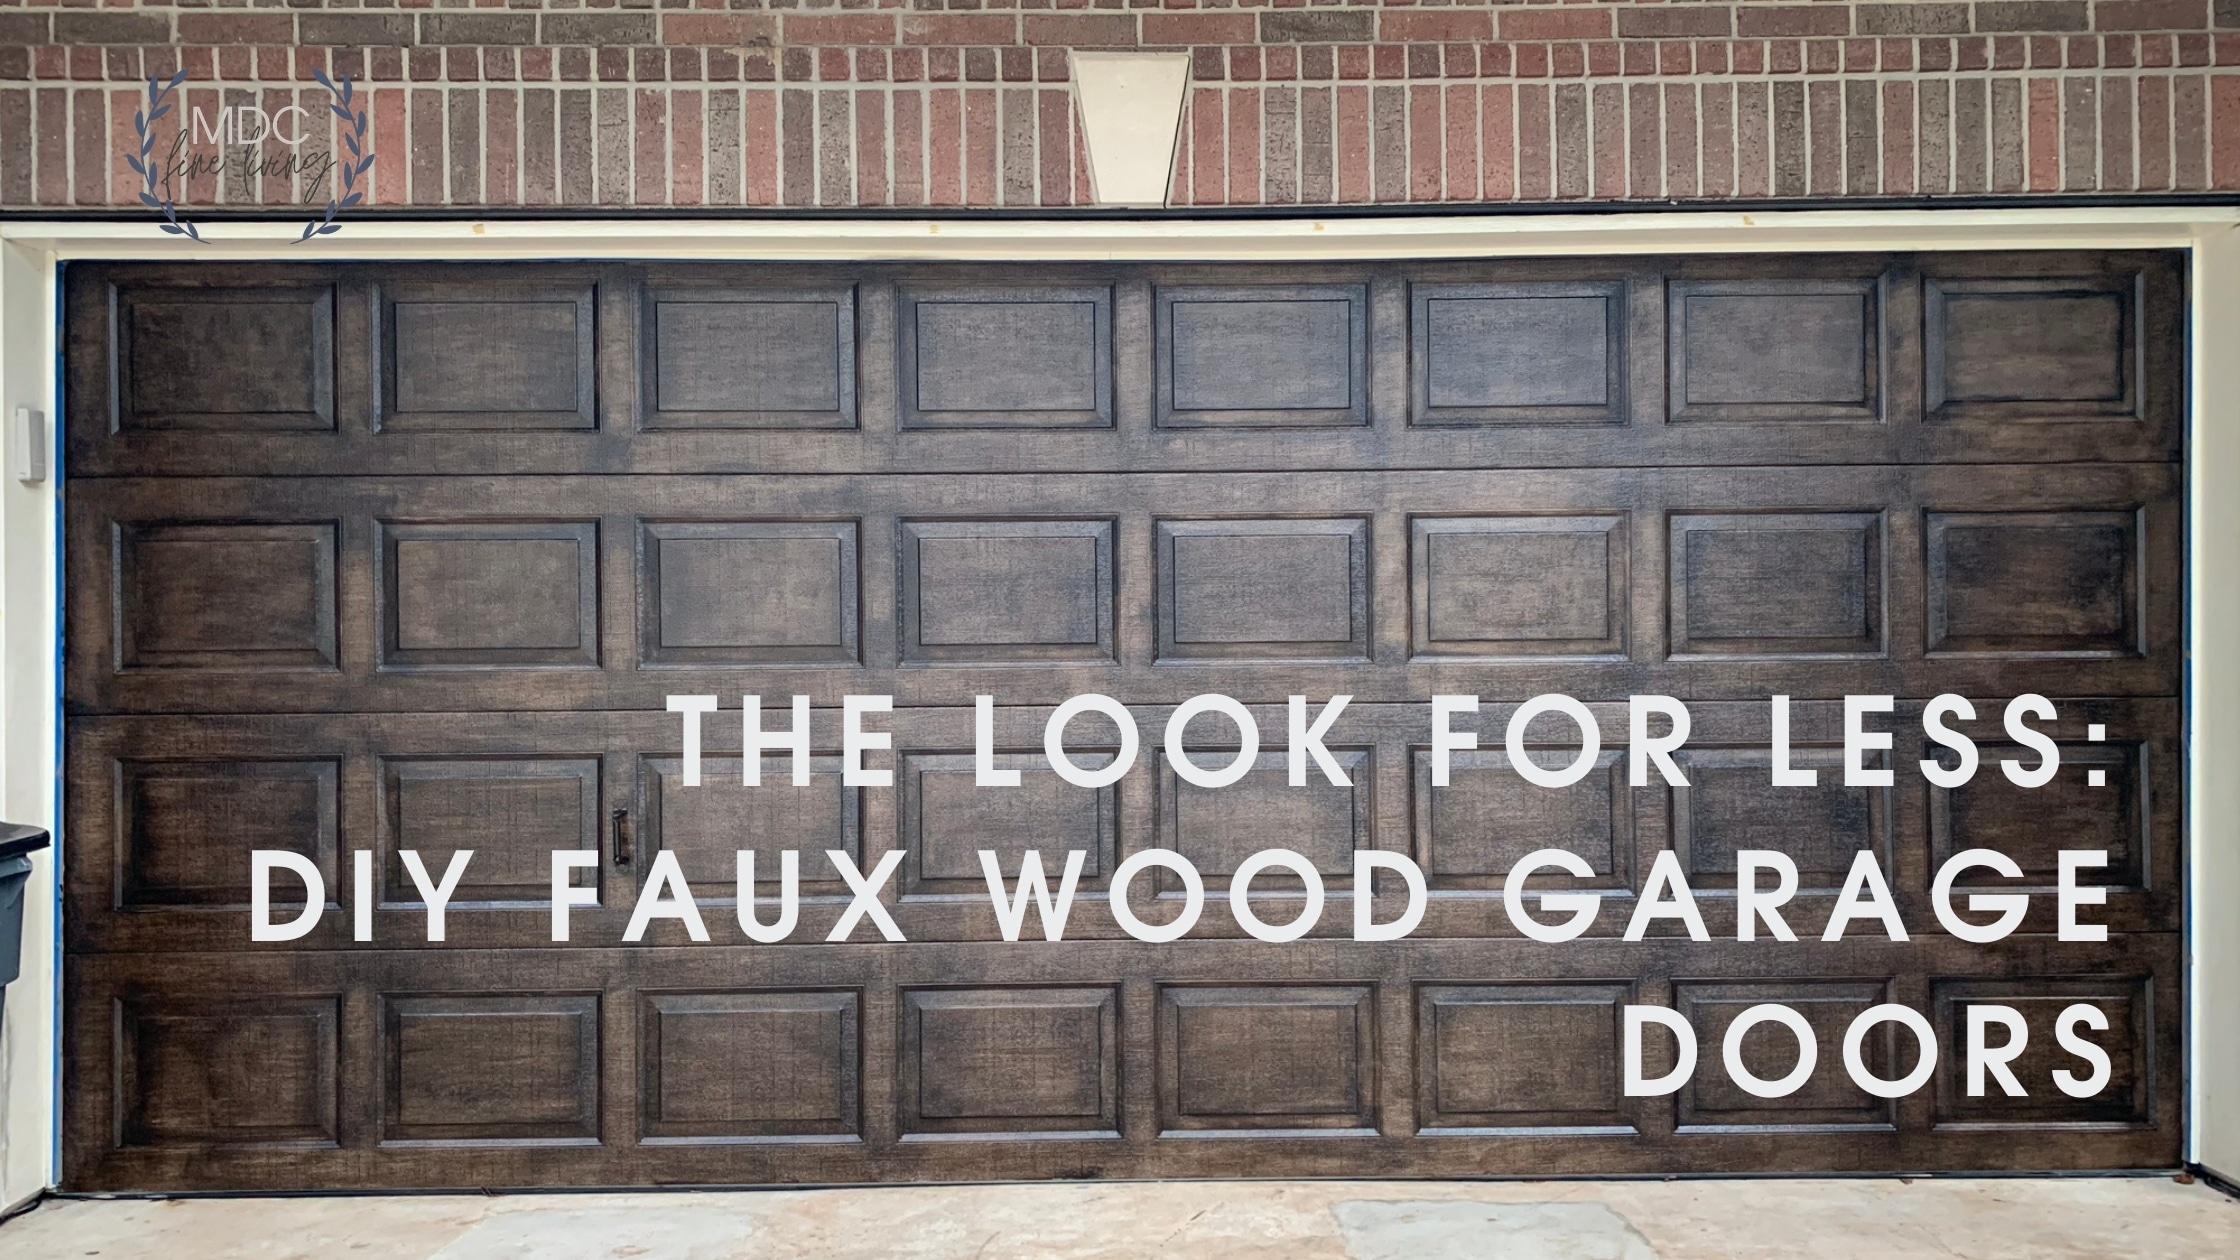 Title card for post that reads, "The Look for Less - DIY Faux Wood Garage Door."